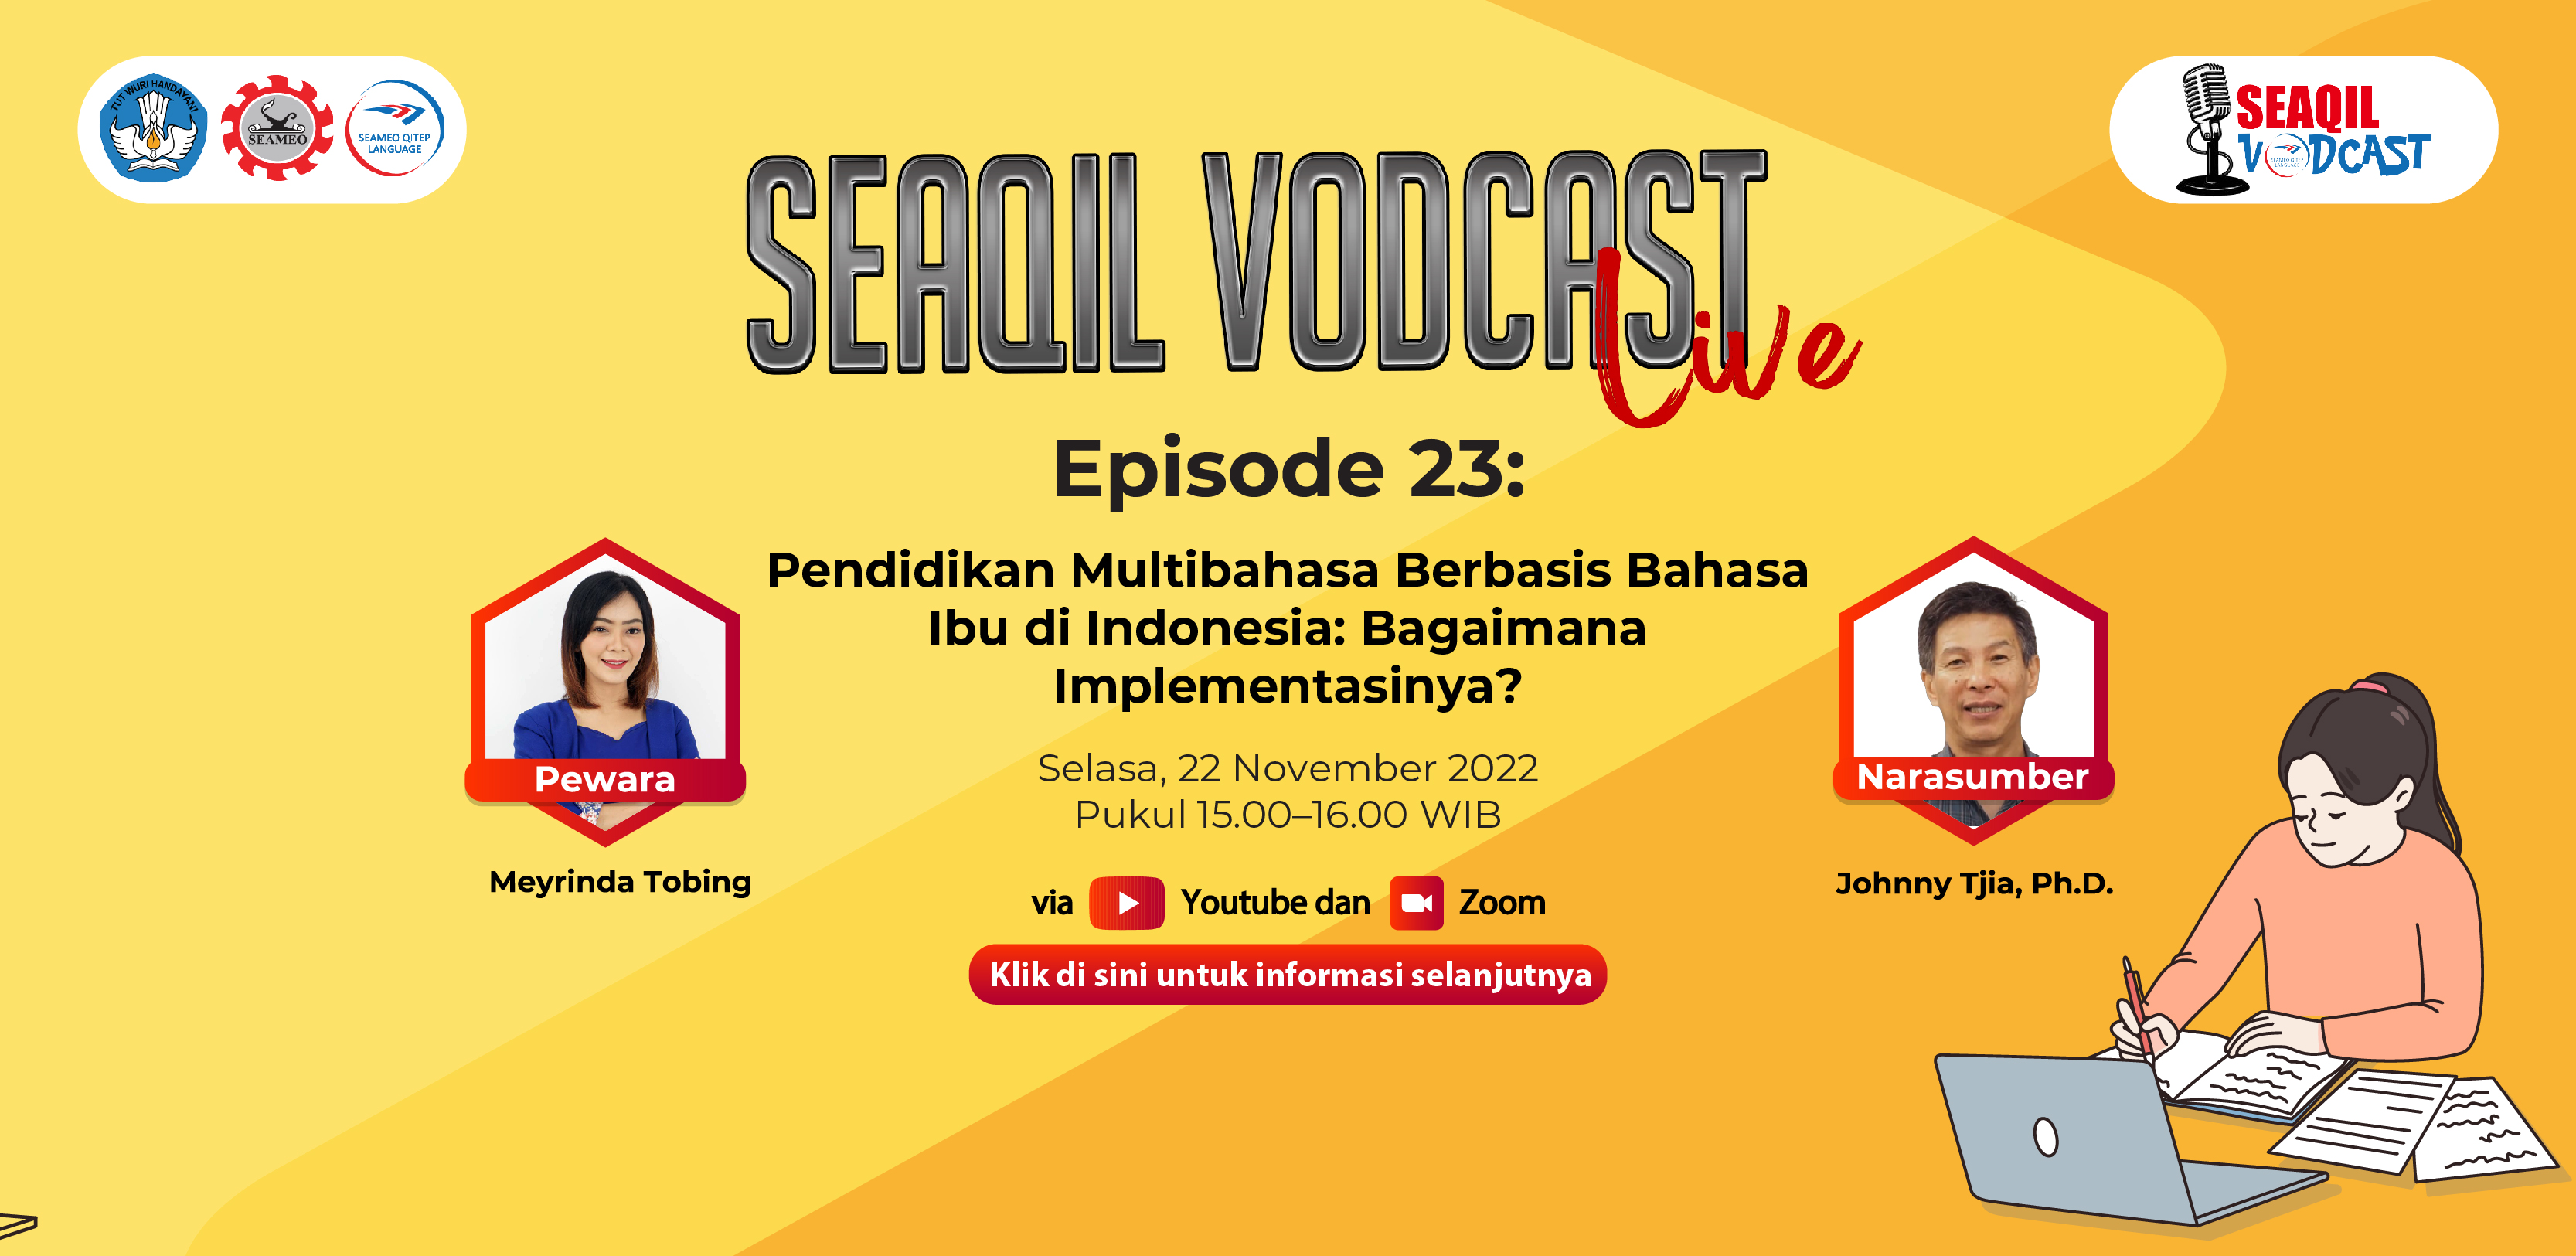 SEAQIL Vodcast Live Episode 23